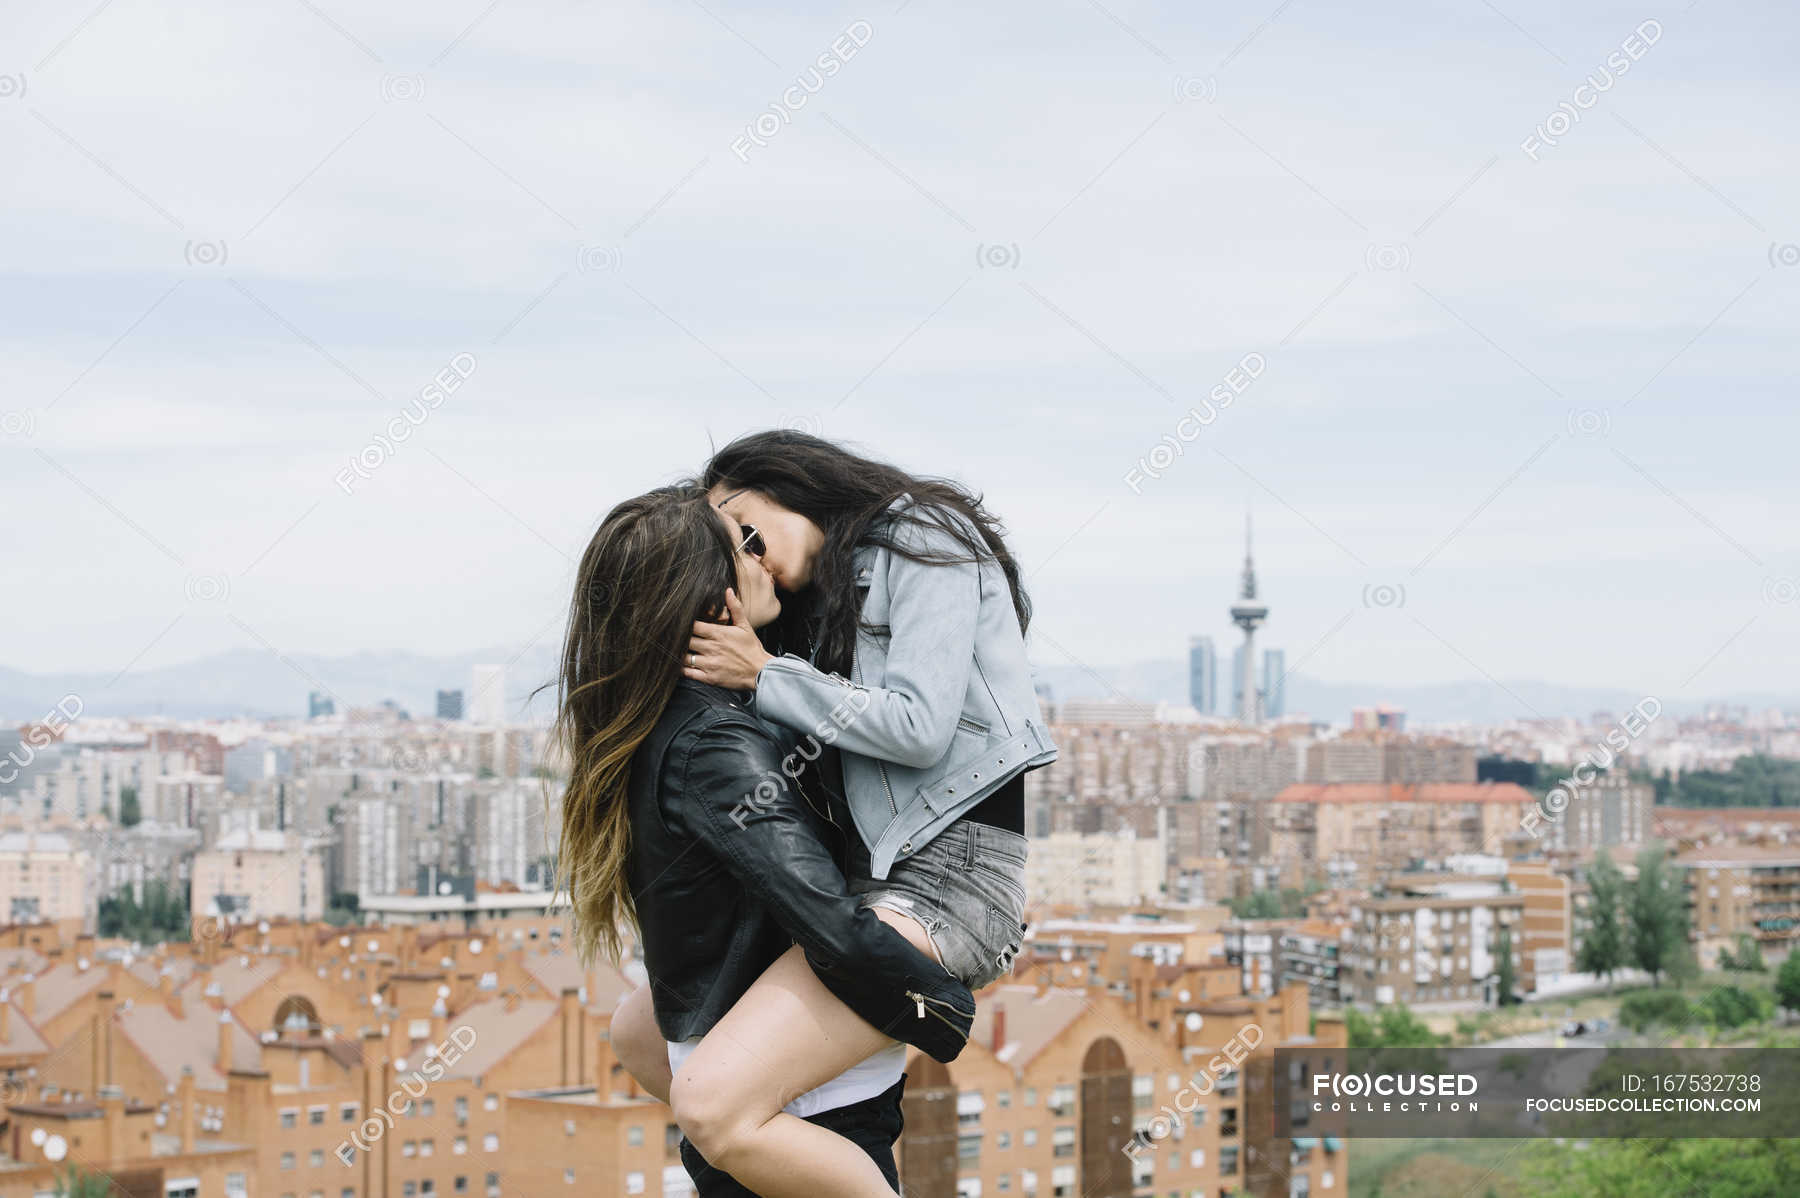 Passionate lesbian couple kissing — gentle, outdoors - Stock Photo |  #167532738